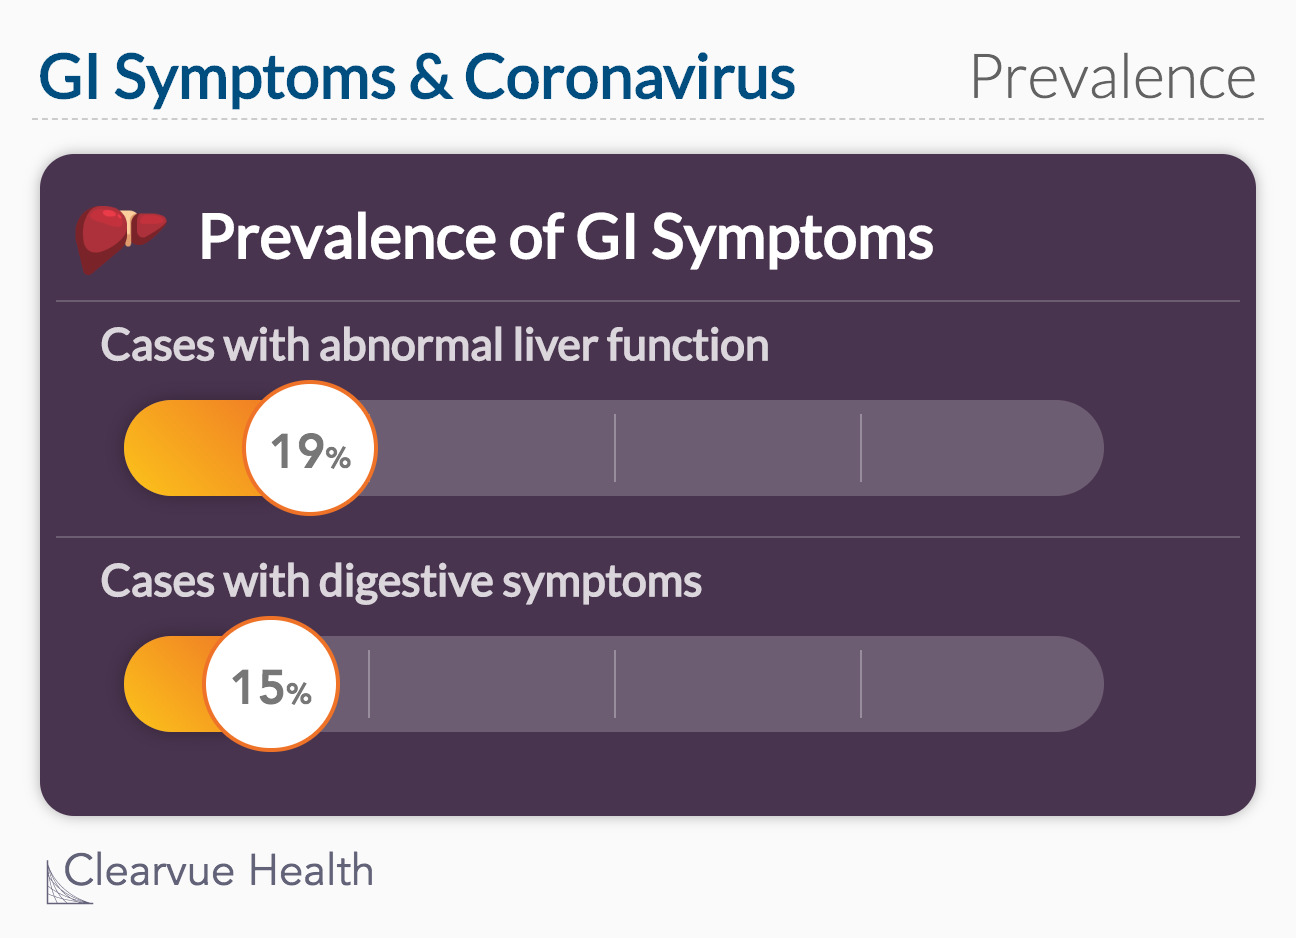 Data on Abnormal liver function and digestive symptoms in COVID-19